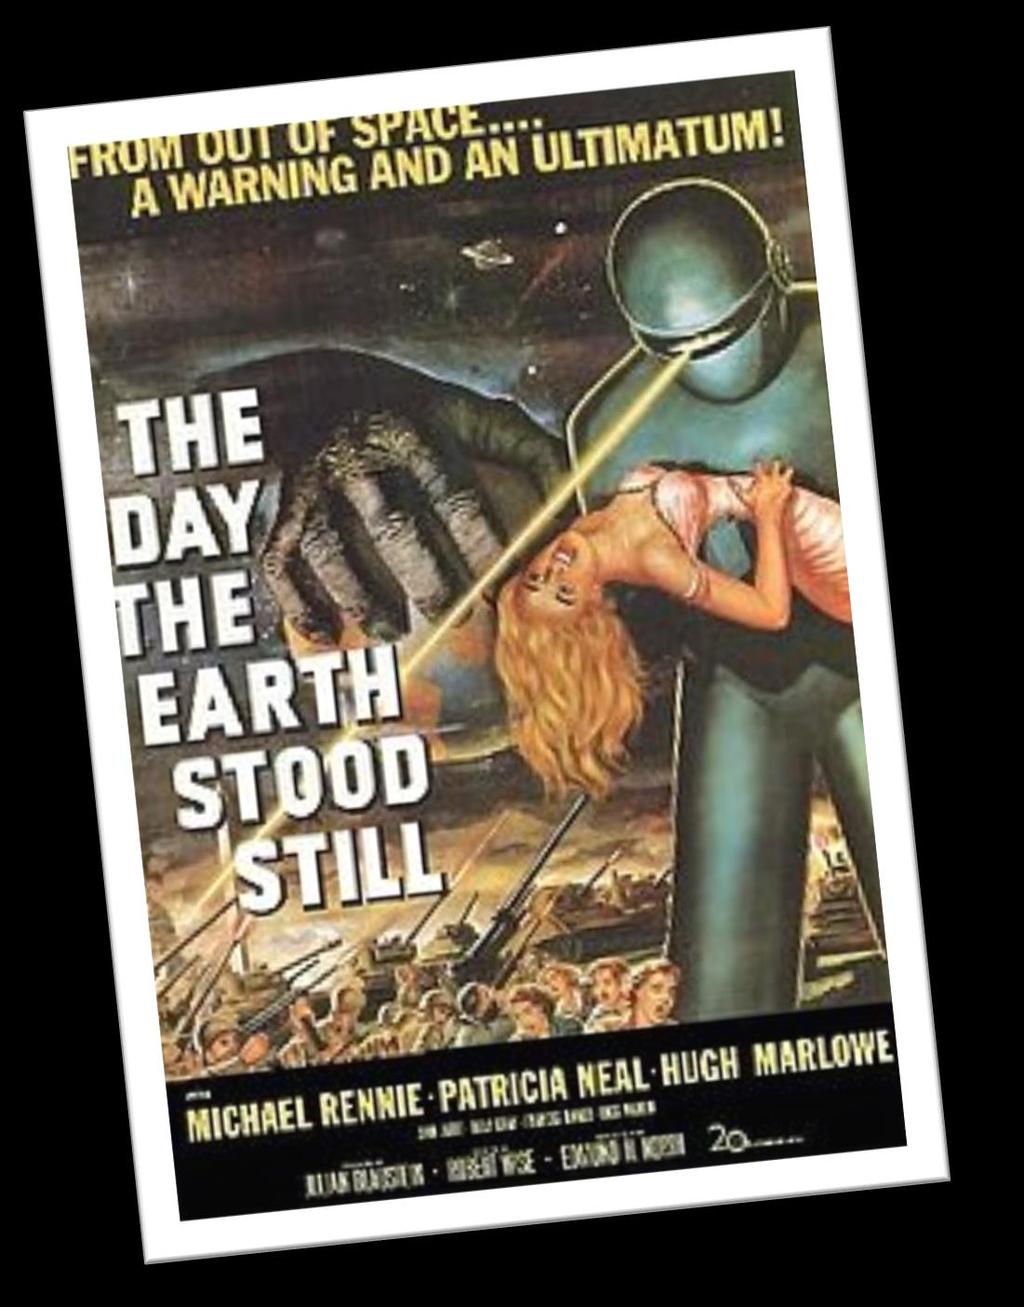 Ruswick, who chose The Day the Earth Stood Still, a science fiction movie produced in 1951.